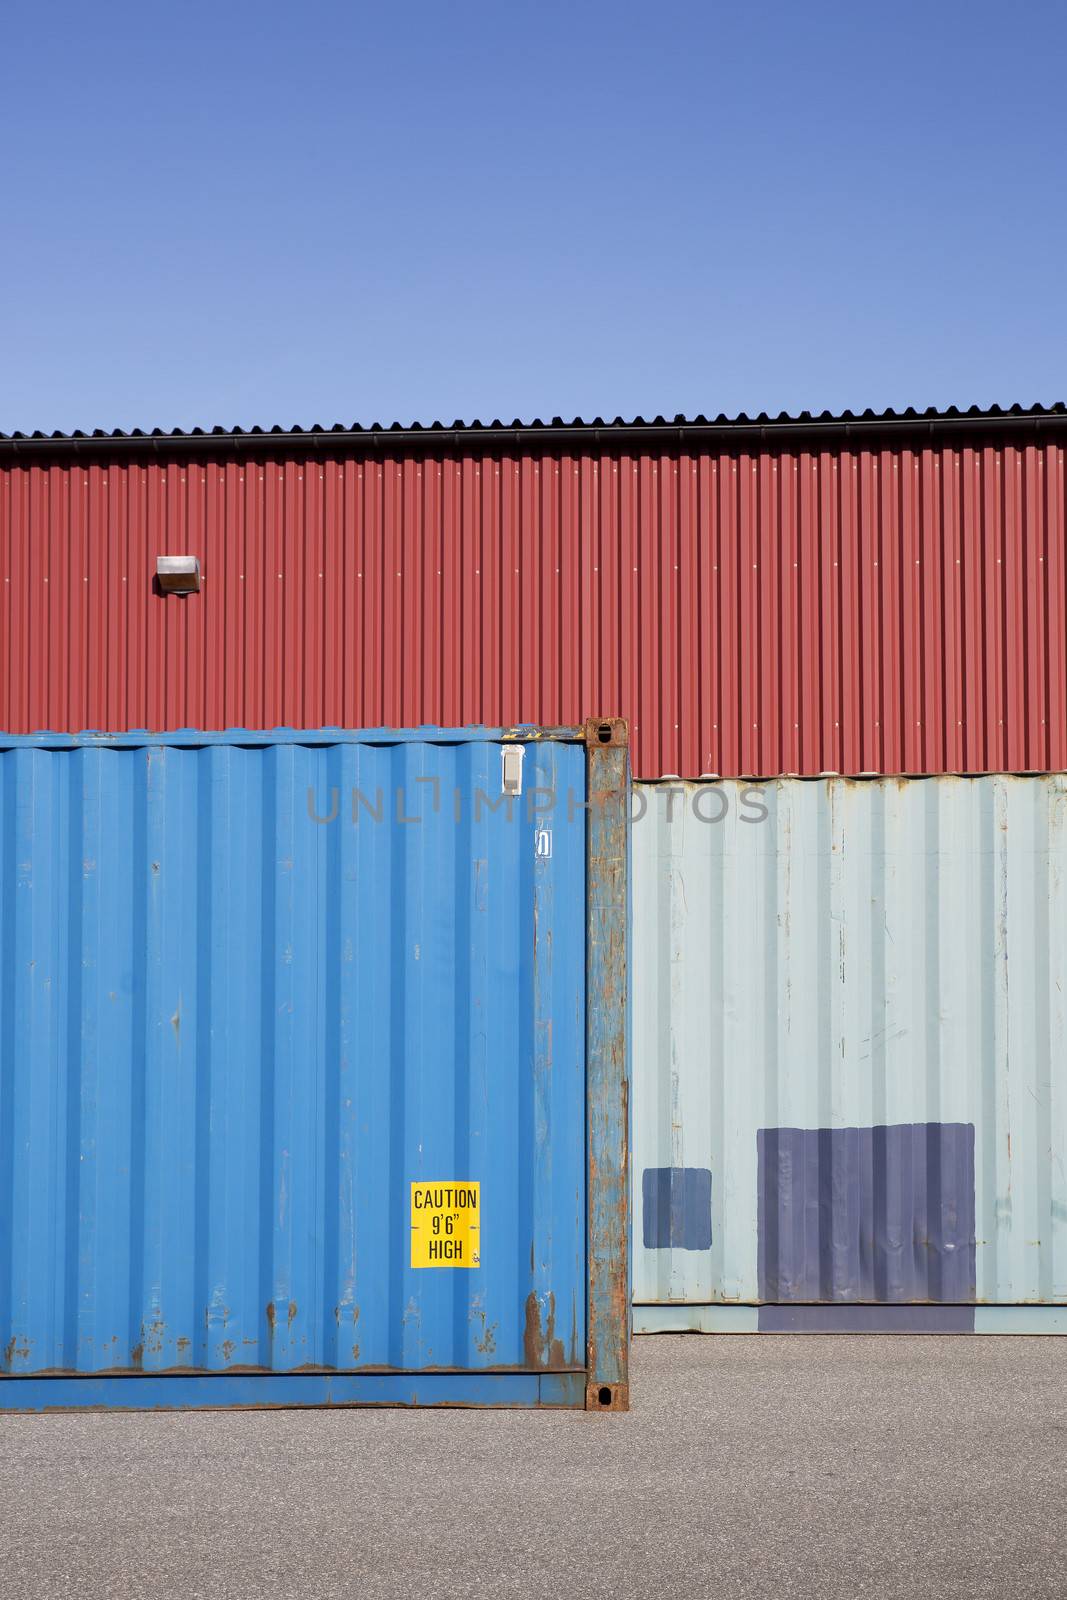 Cargo Containers on a sunny day